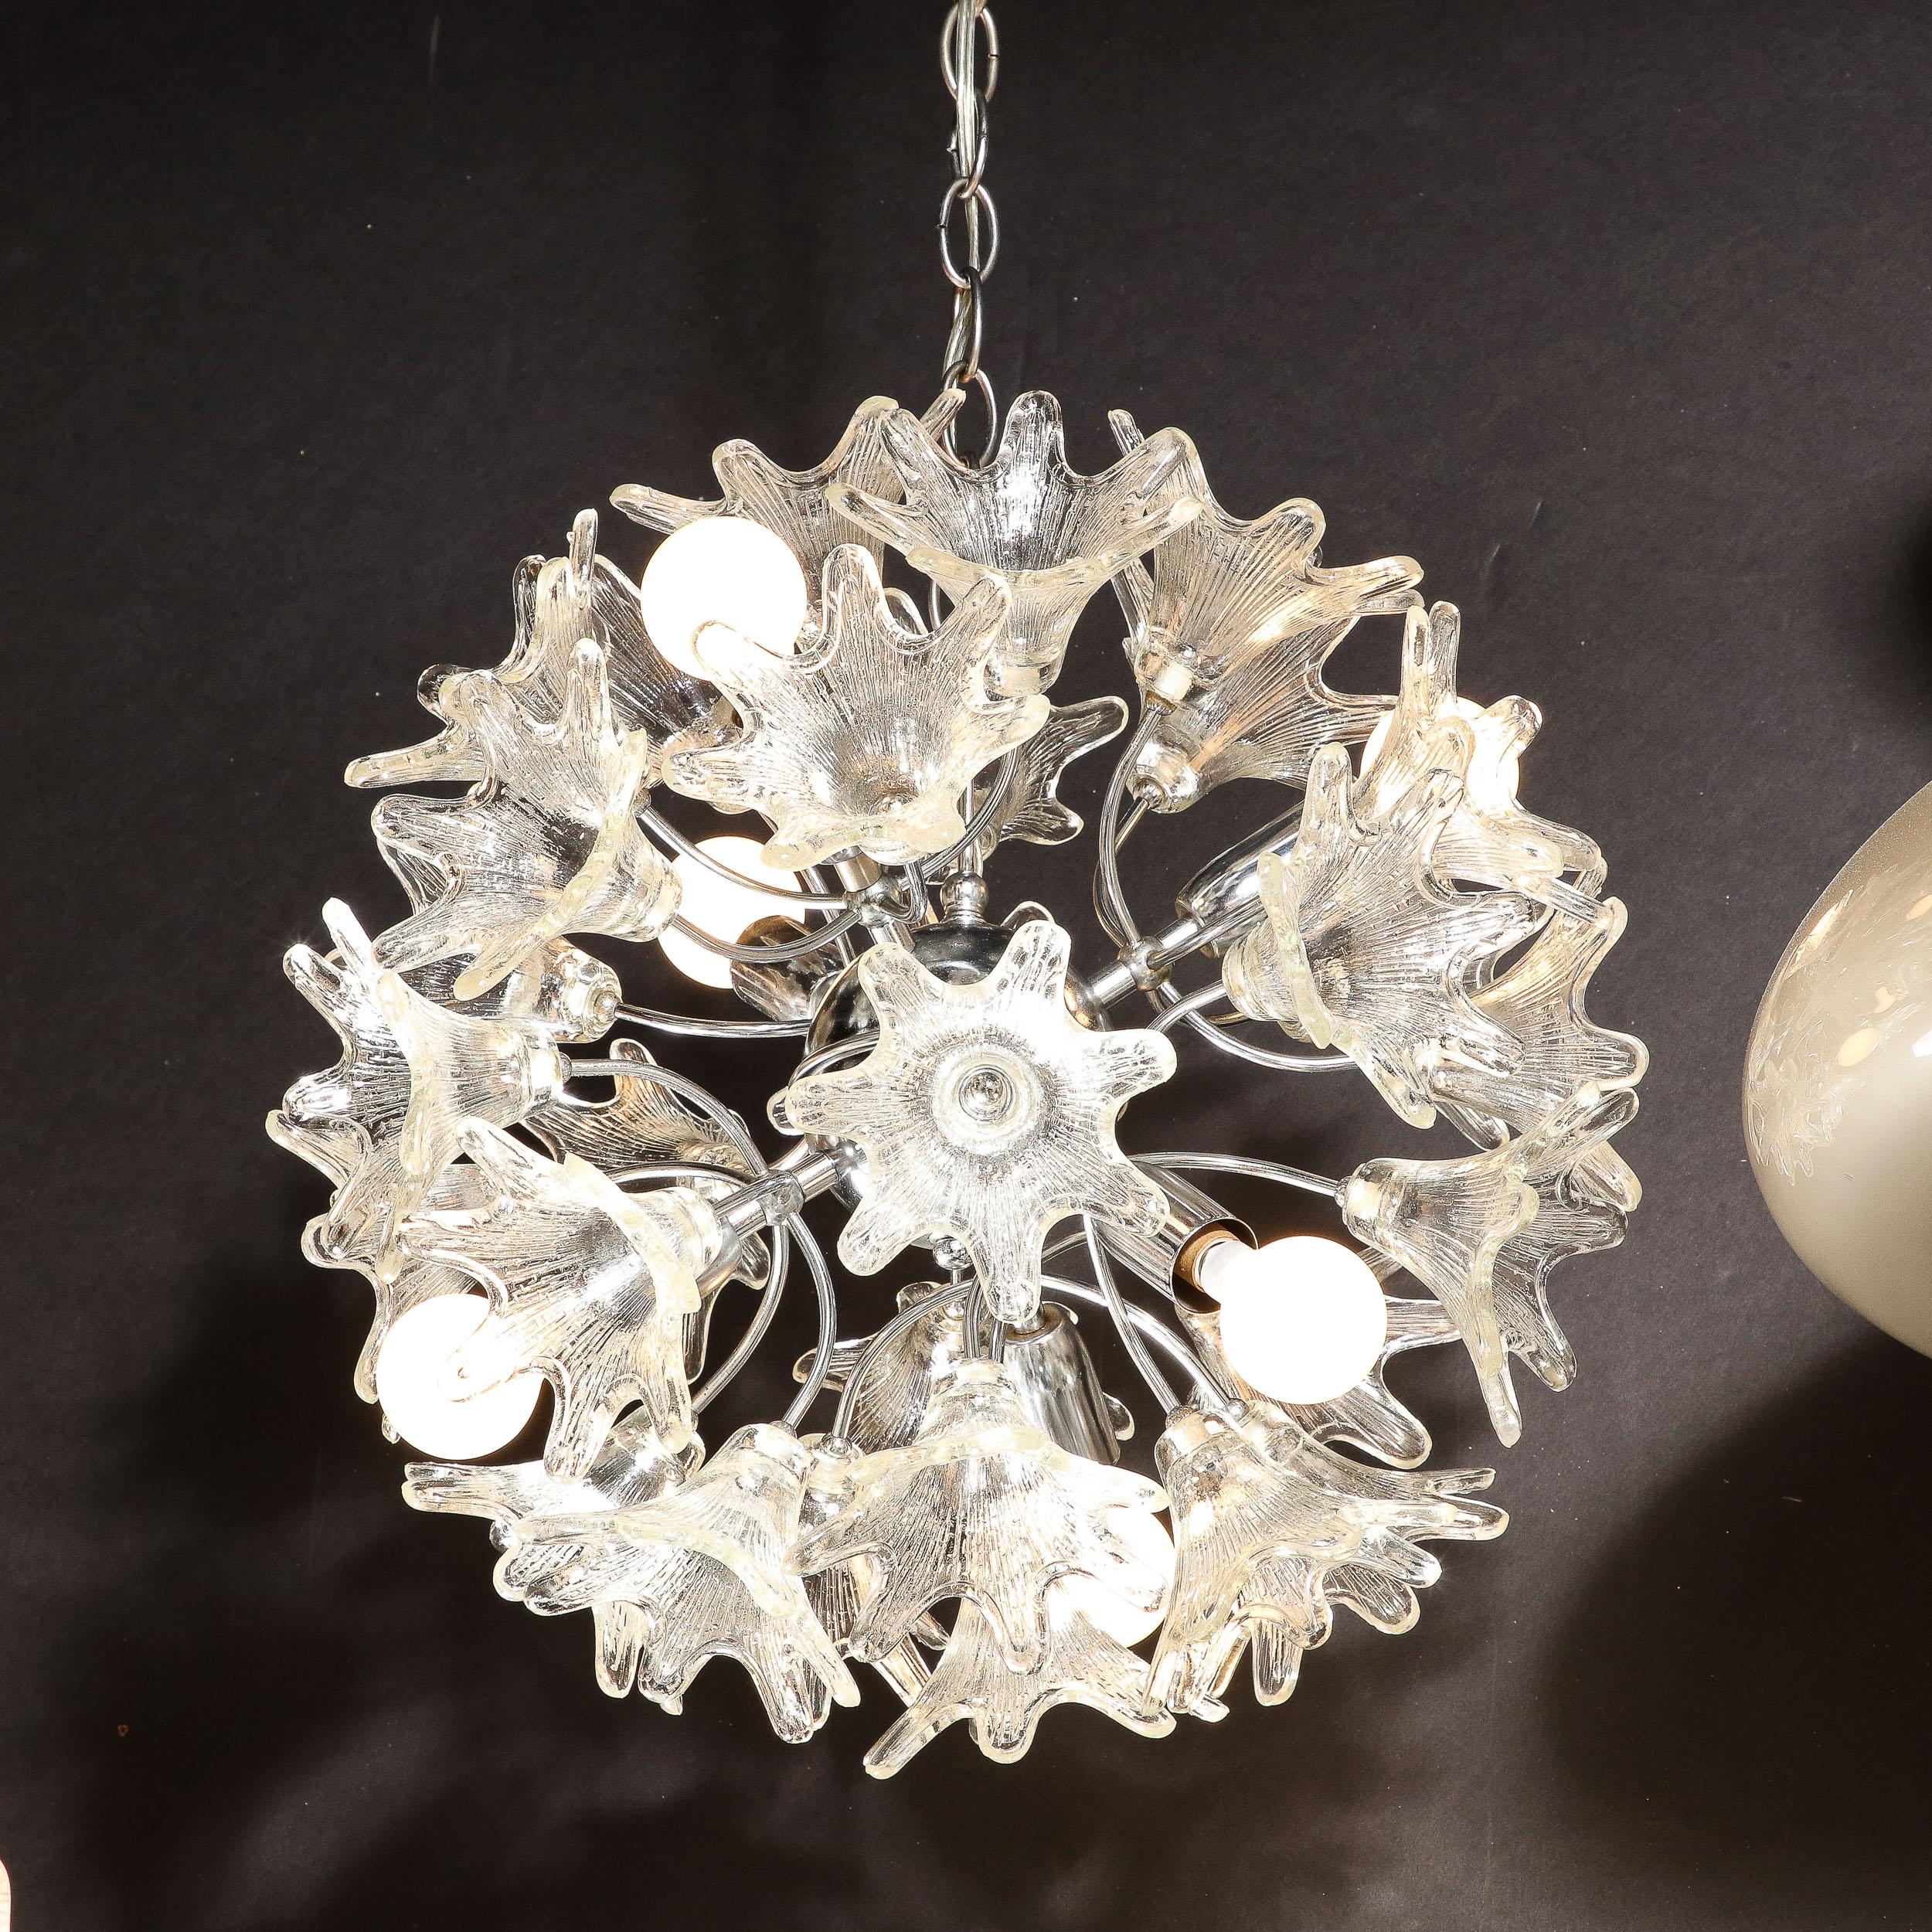 Modernist Hand-Blown Murano Translucent Glass & Chrome Floral Sputnik Chandelier In Excellent Condition For Sale In New York, NY